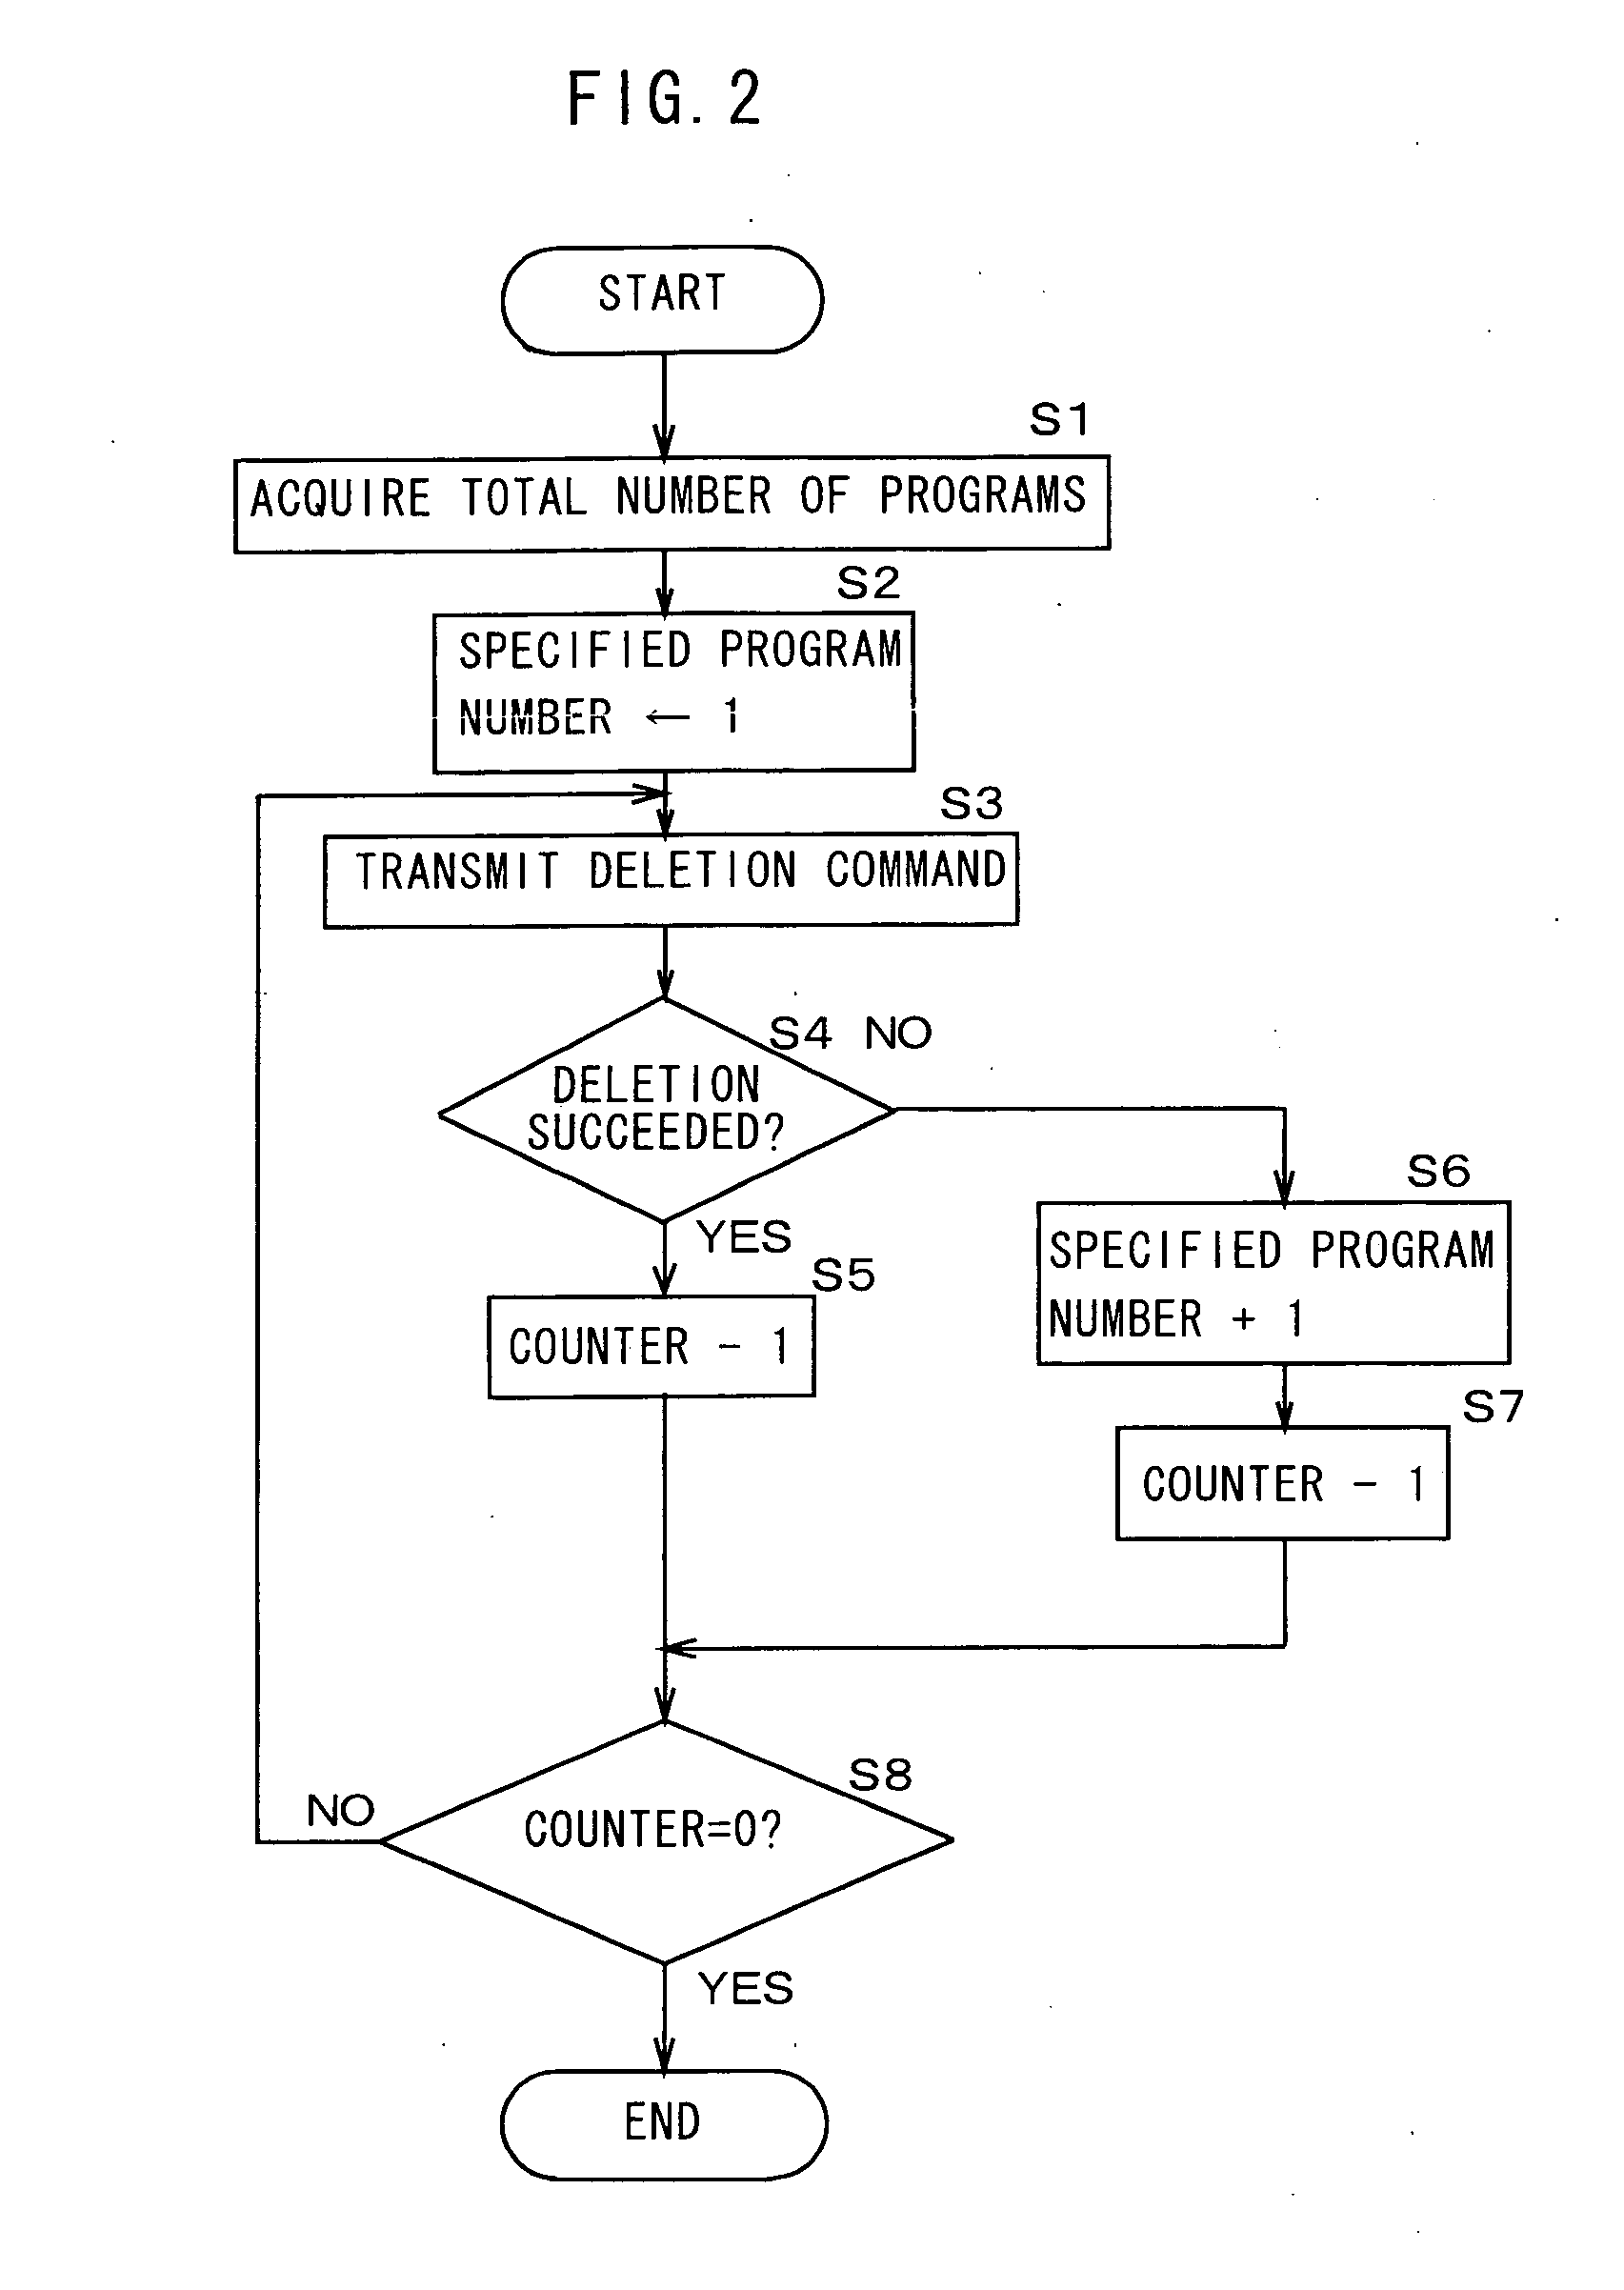 Controller device to be connected to IEEE 1394 serial bus